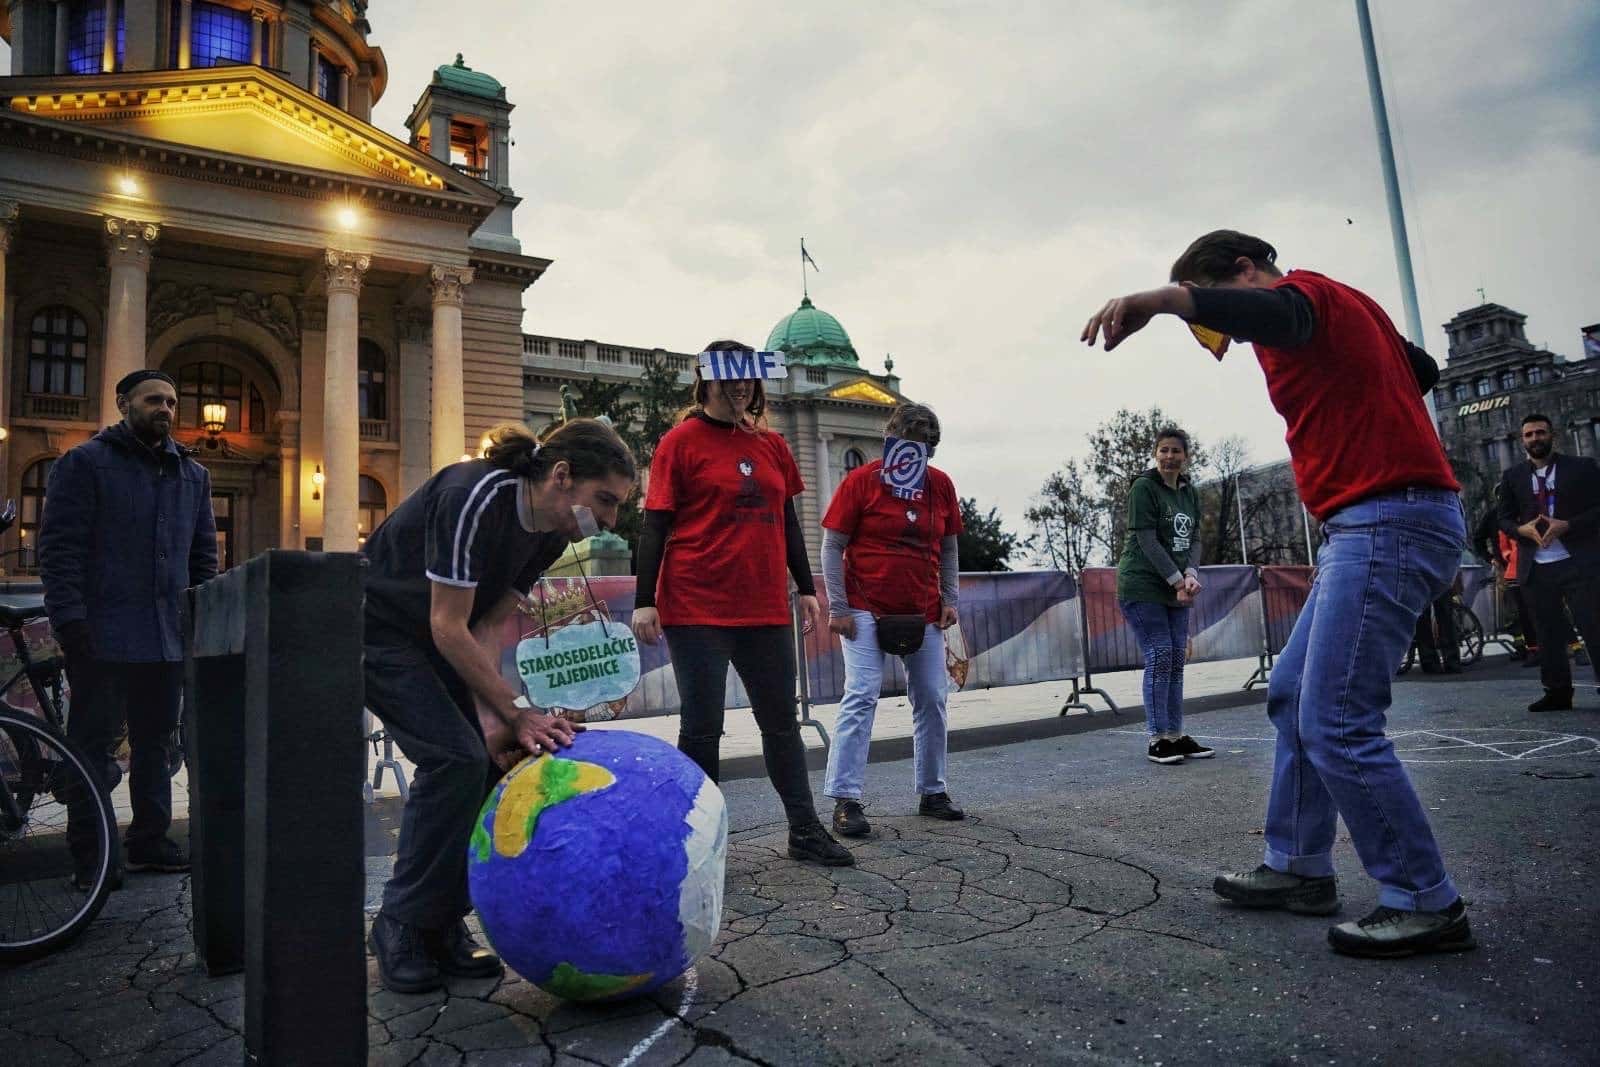 Rebels wear masks showing corporate logos and play football beside parliament. The football is a small planet earth.